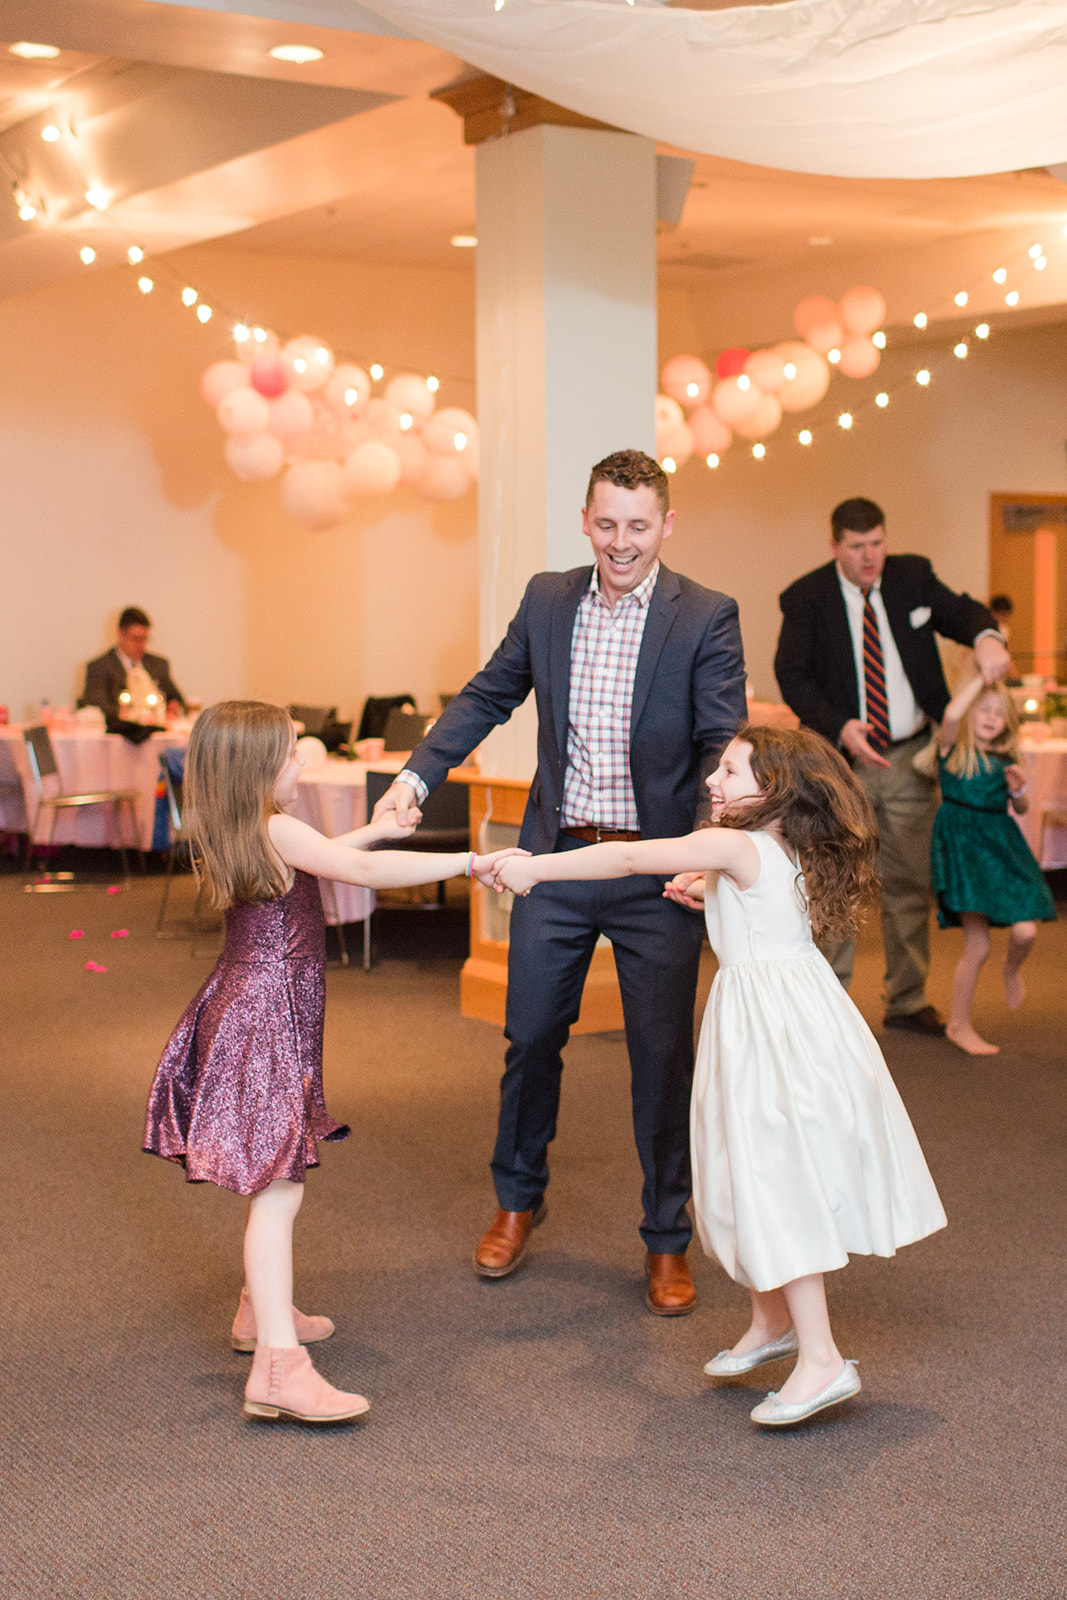 The Father Daughter Daughter Dance living on grace